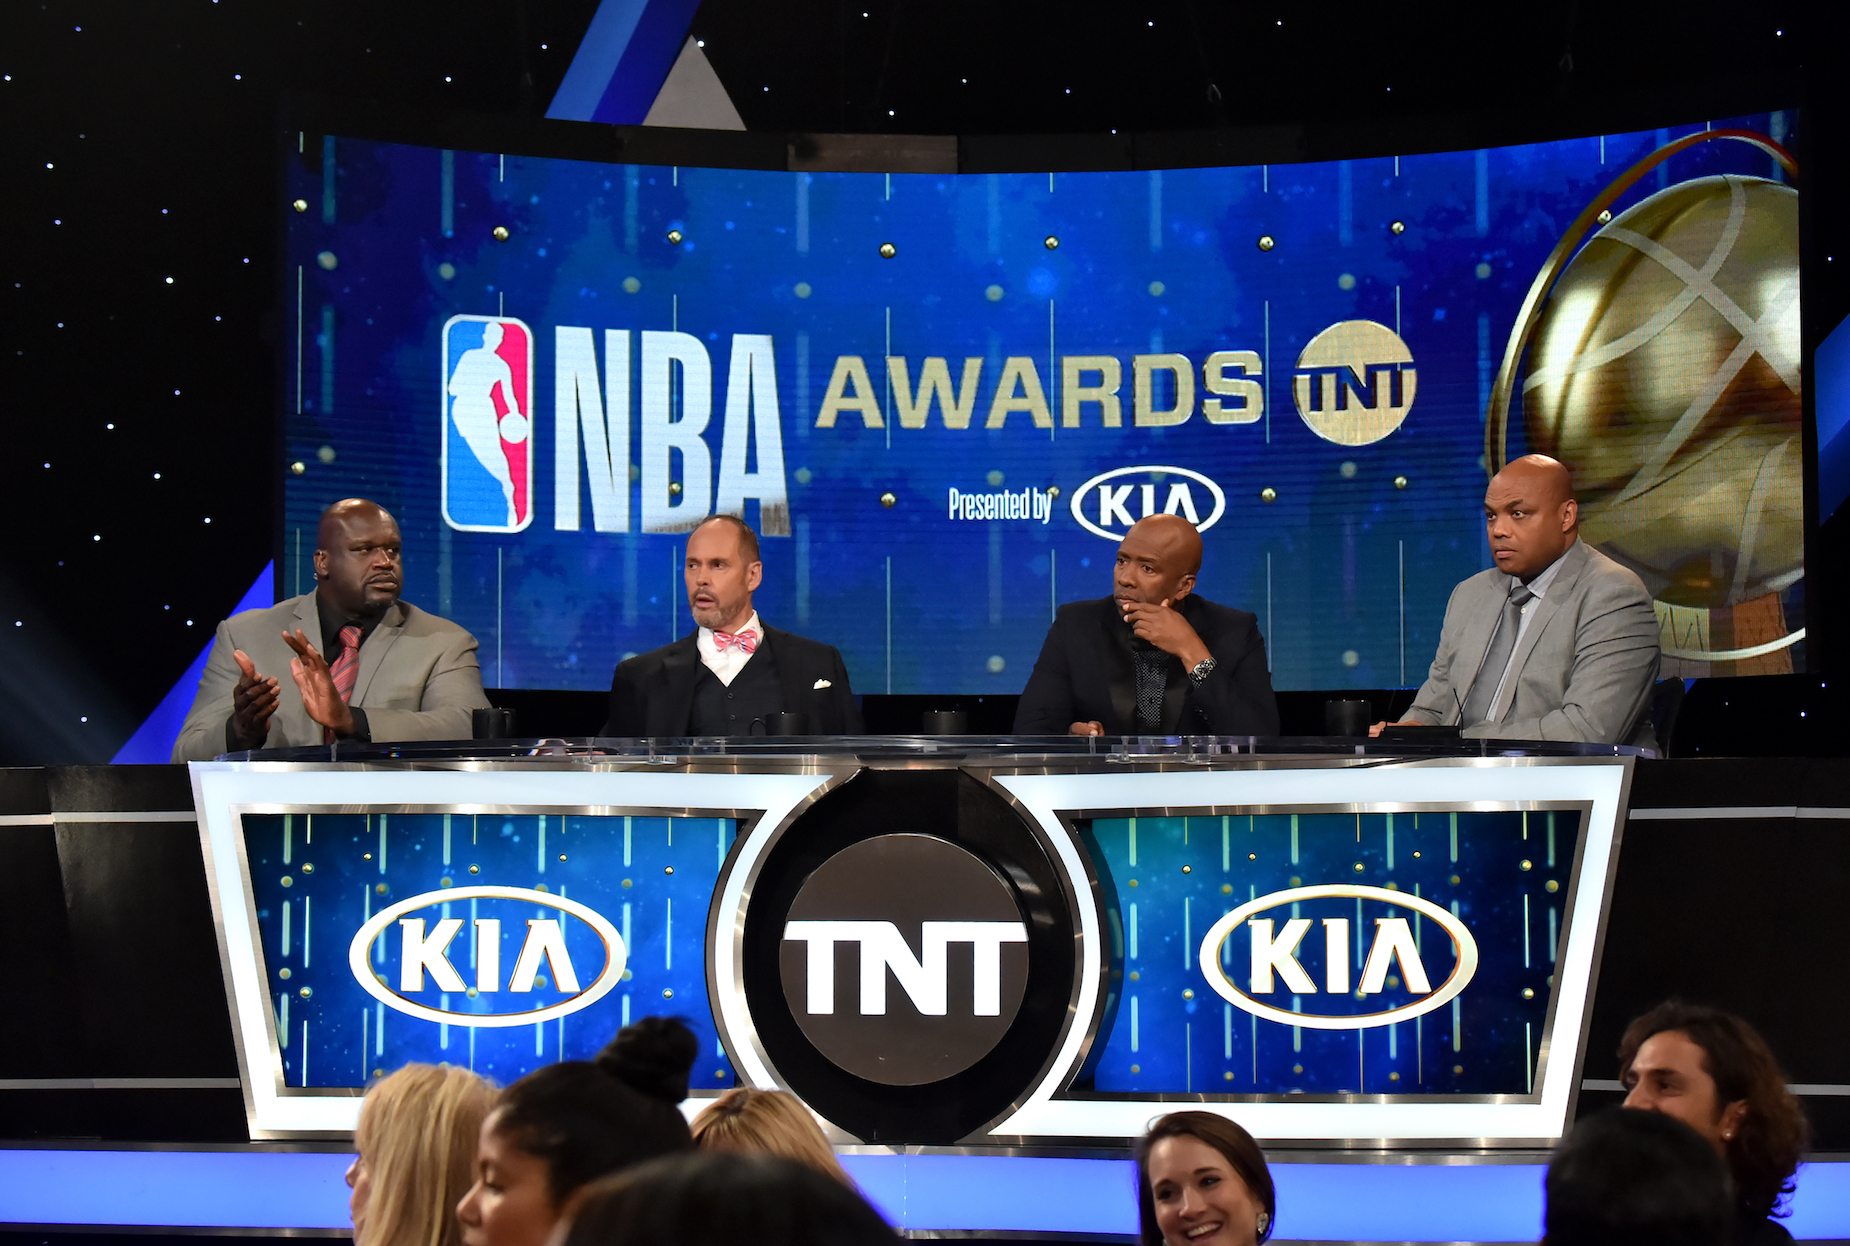 Despite their tension on 'Inside the NBA,' Charles Barkley and Shaquille O'Neal get along quite well.